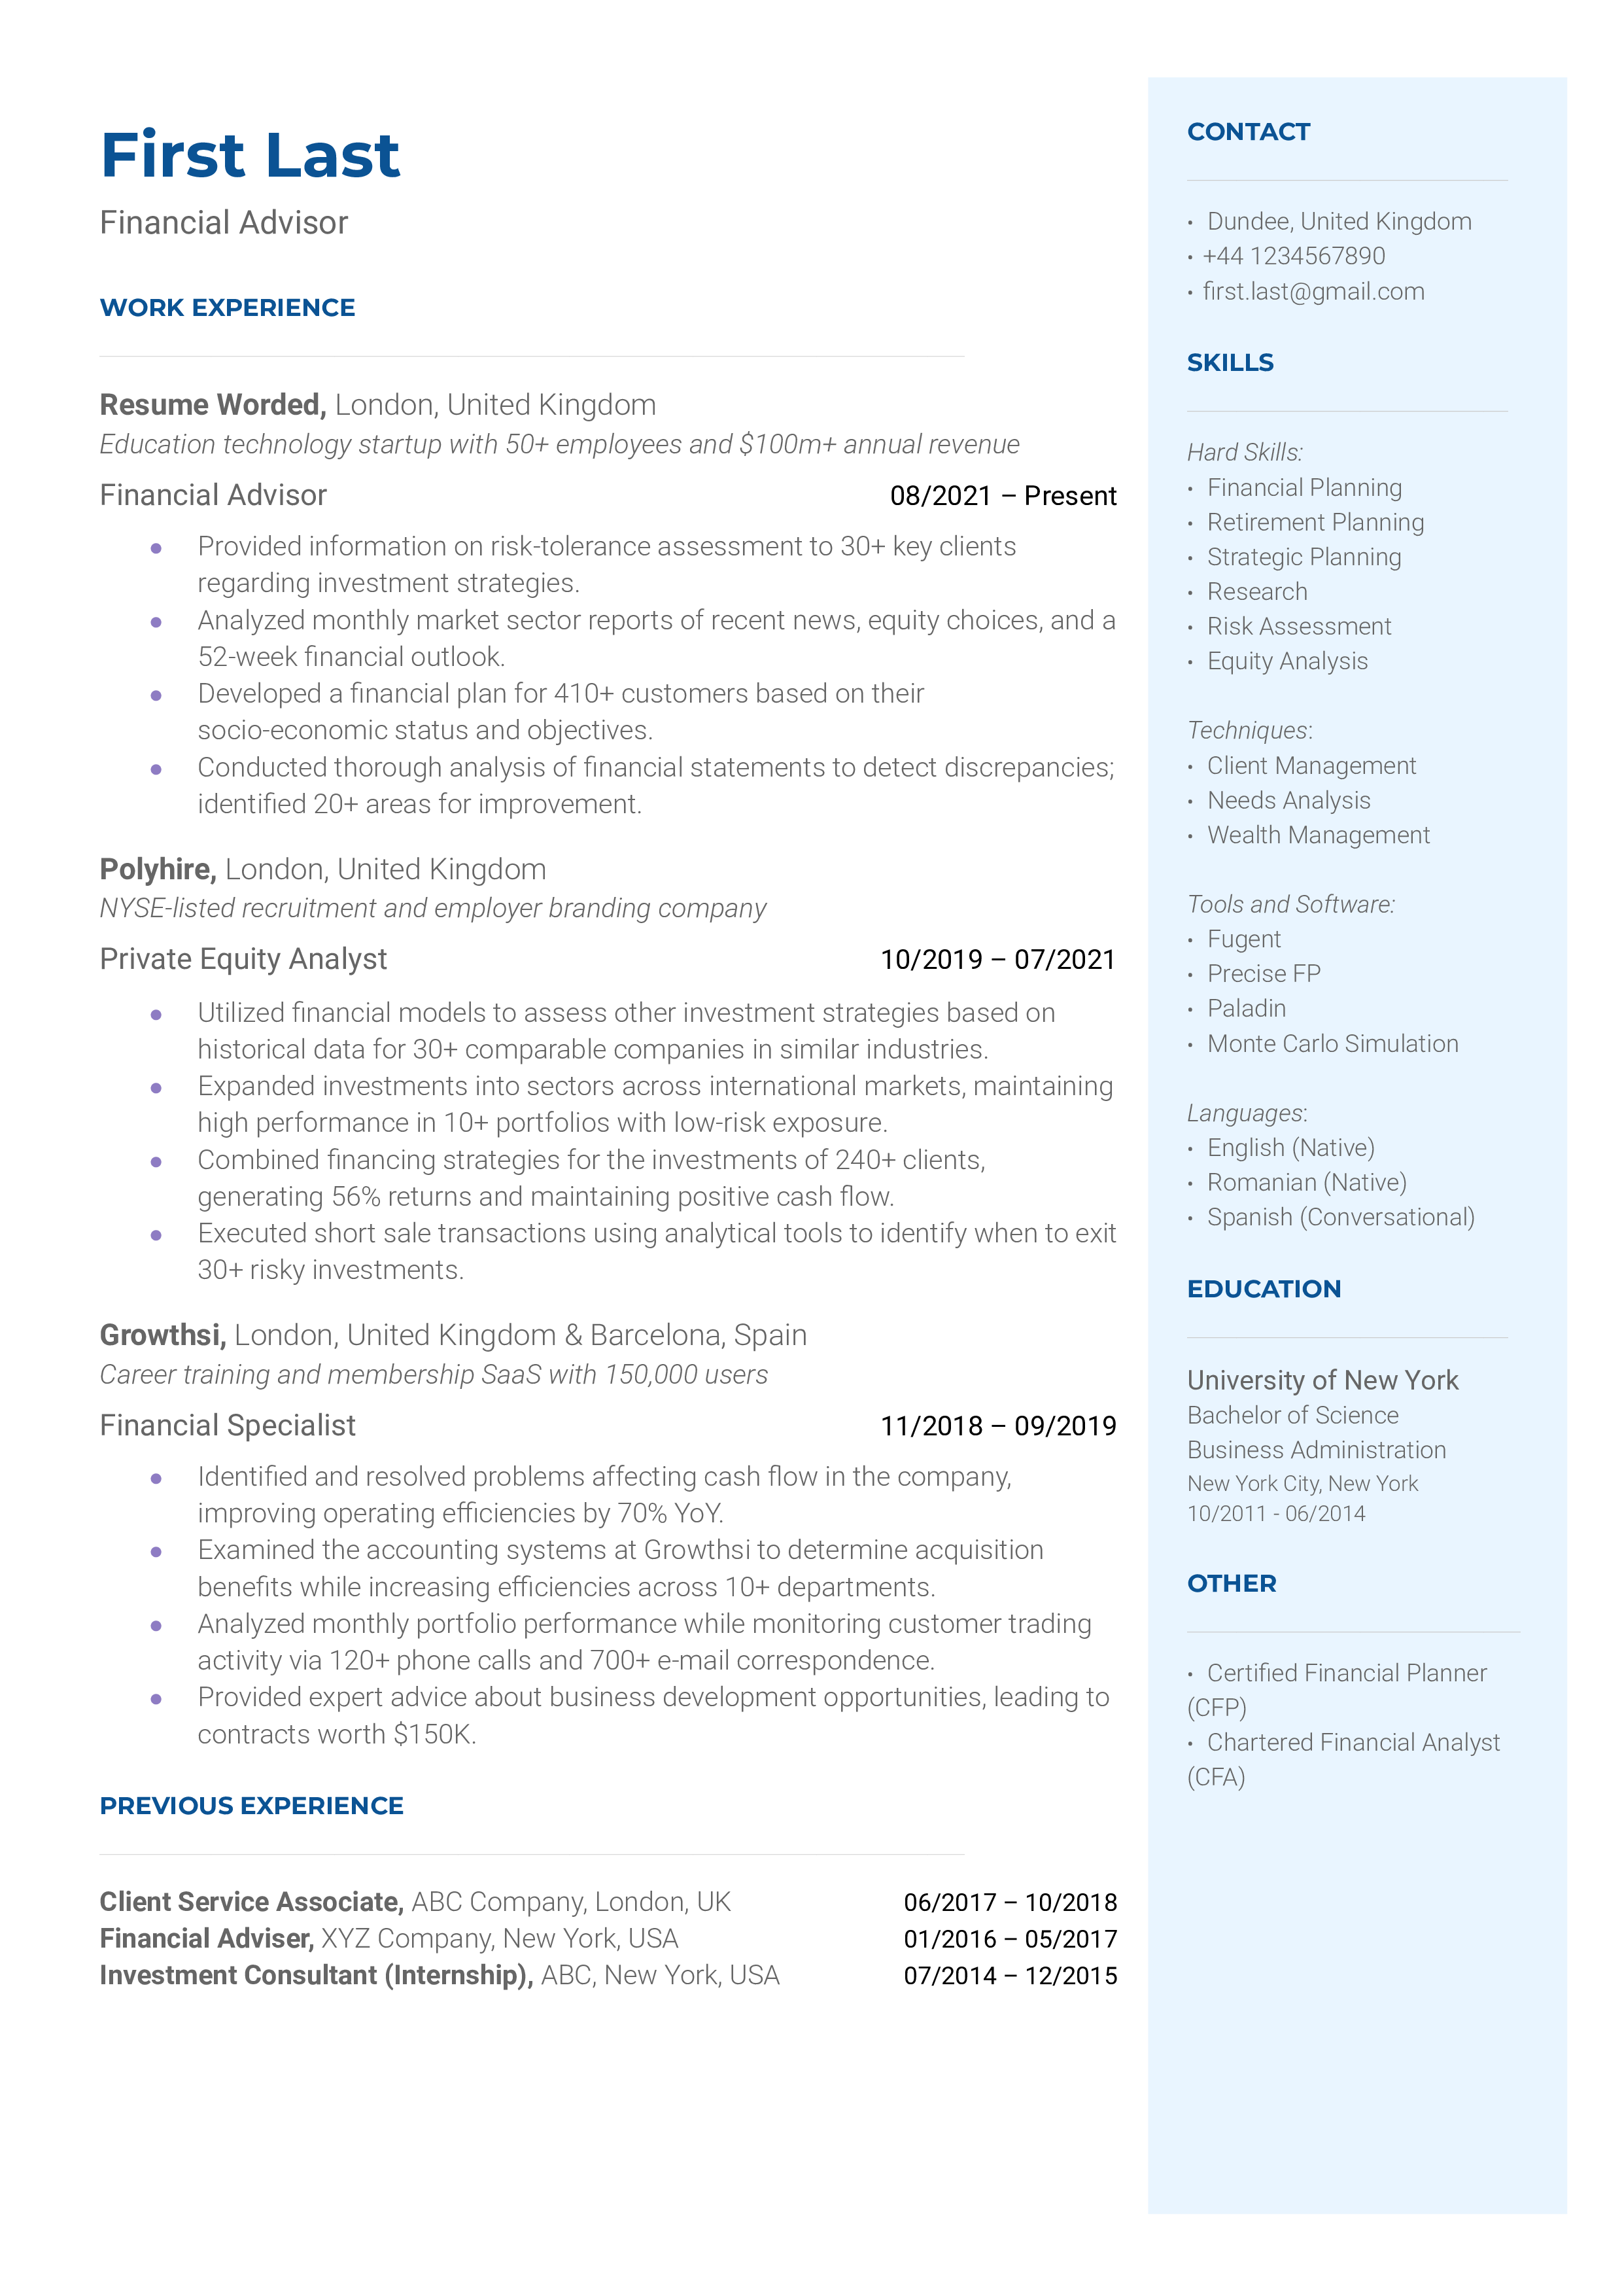 A well-structured CV showing the problem-solving and technical skills of a Financial Advisor.